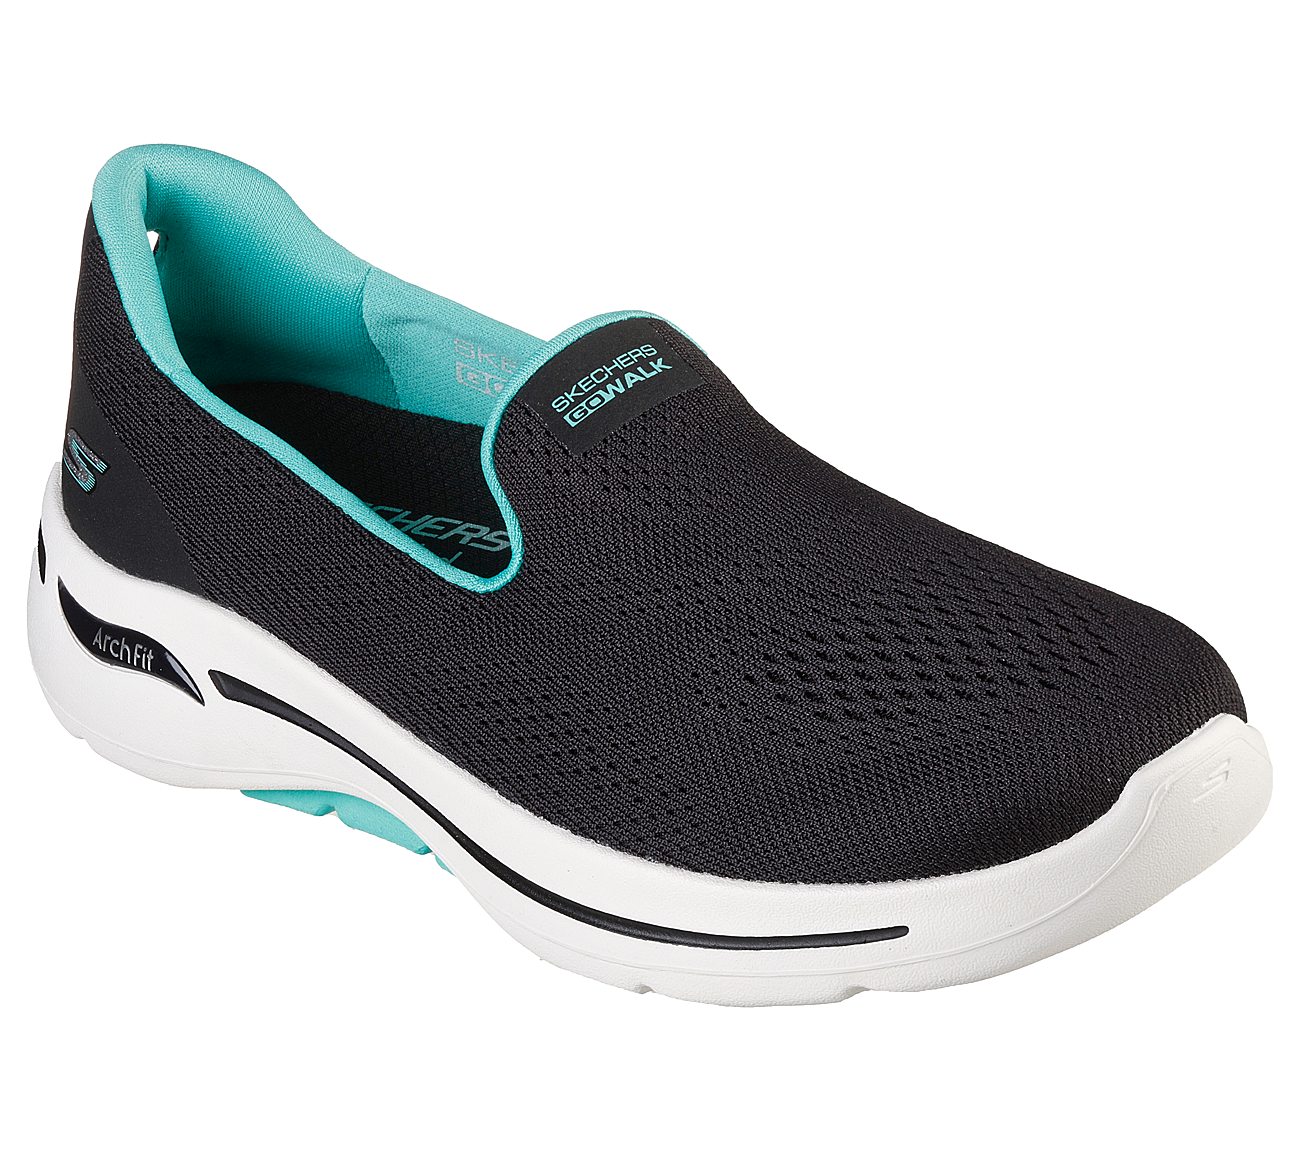 GO WALK ARCH FIT - IMAGINED, BLACK/TURQUOISE Footwear Right View